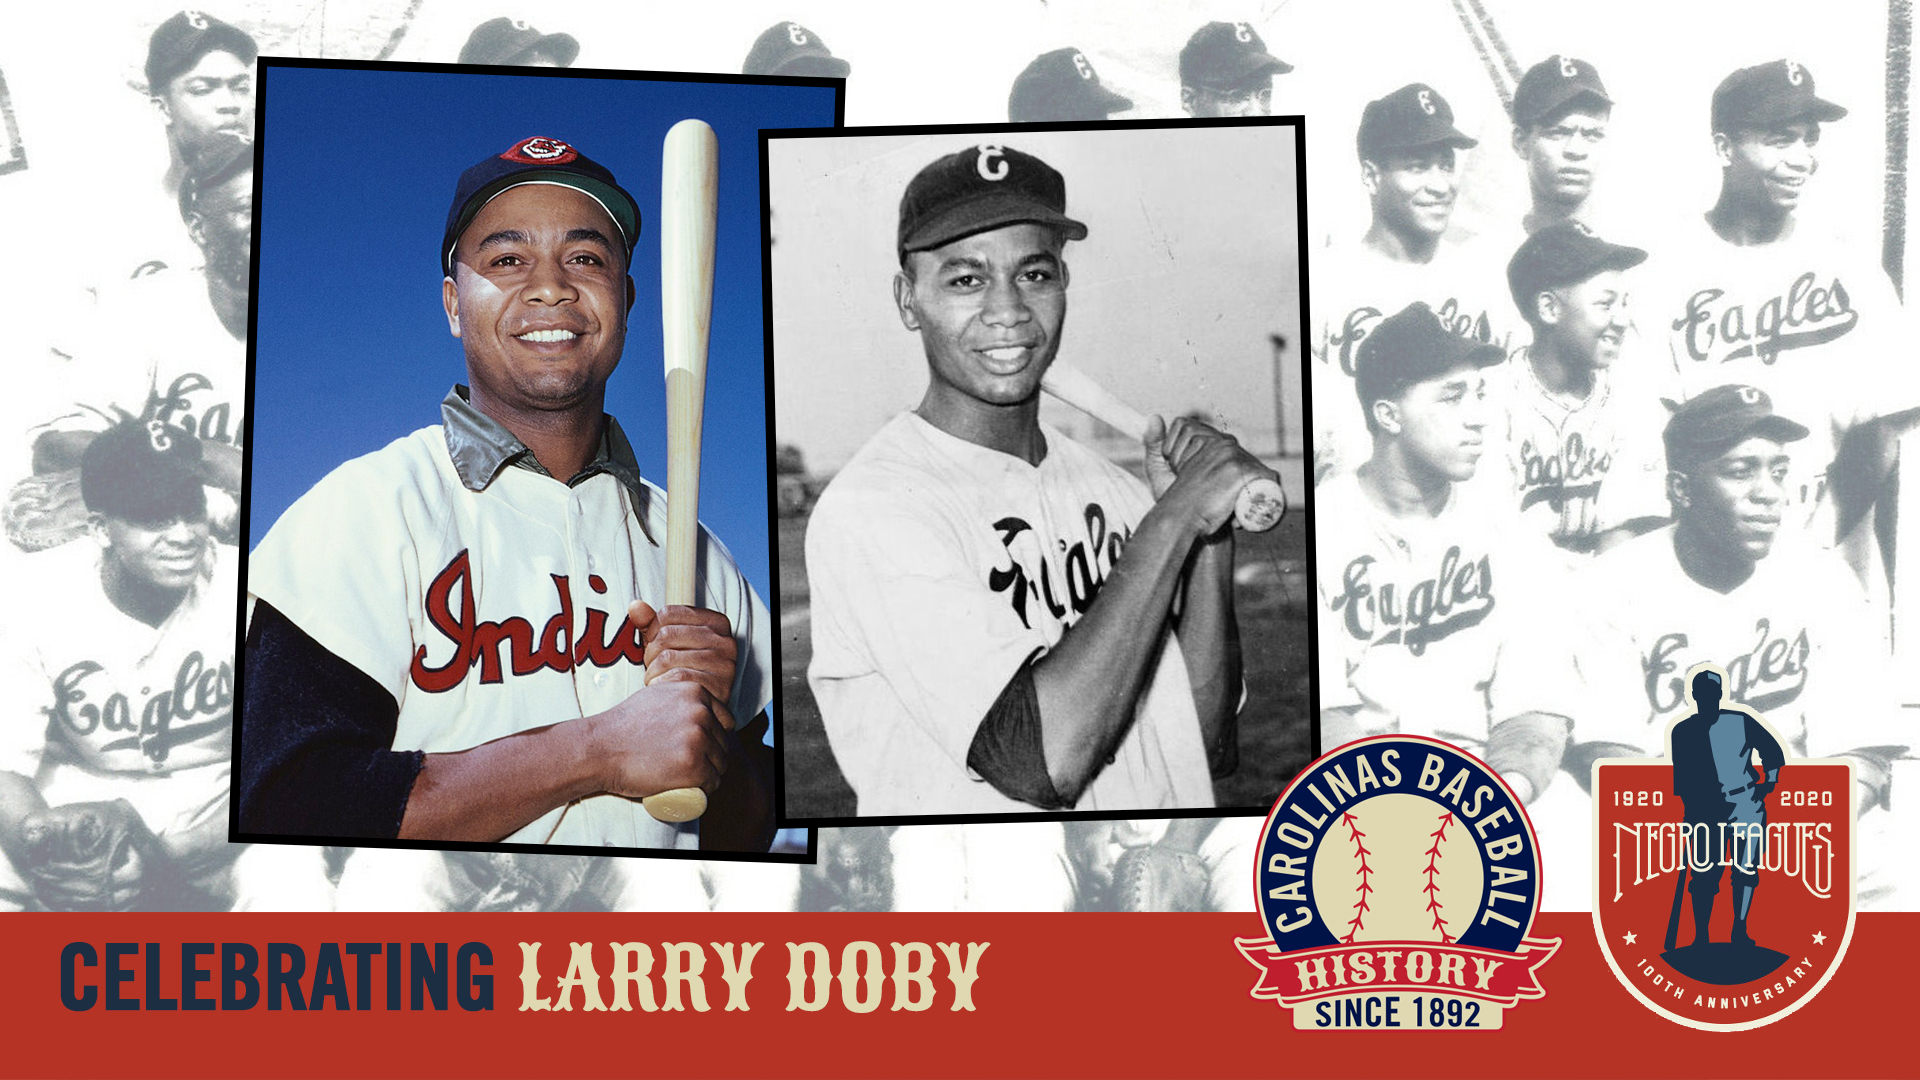 Larry Doby: the Jackie Robinson of the Indians' last World Series champions, World Series